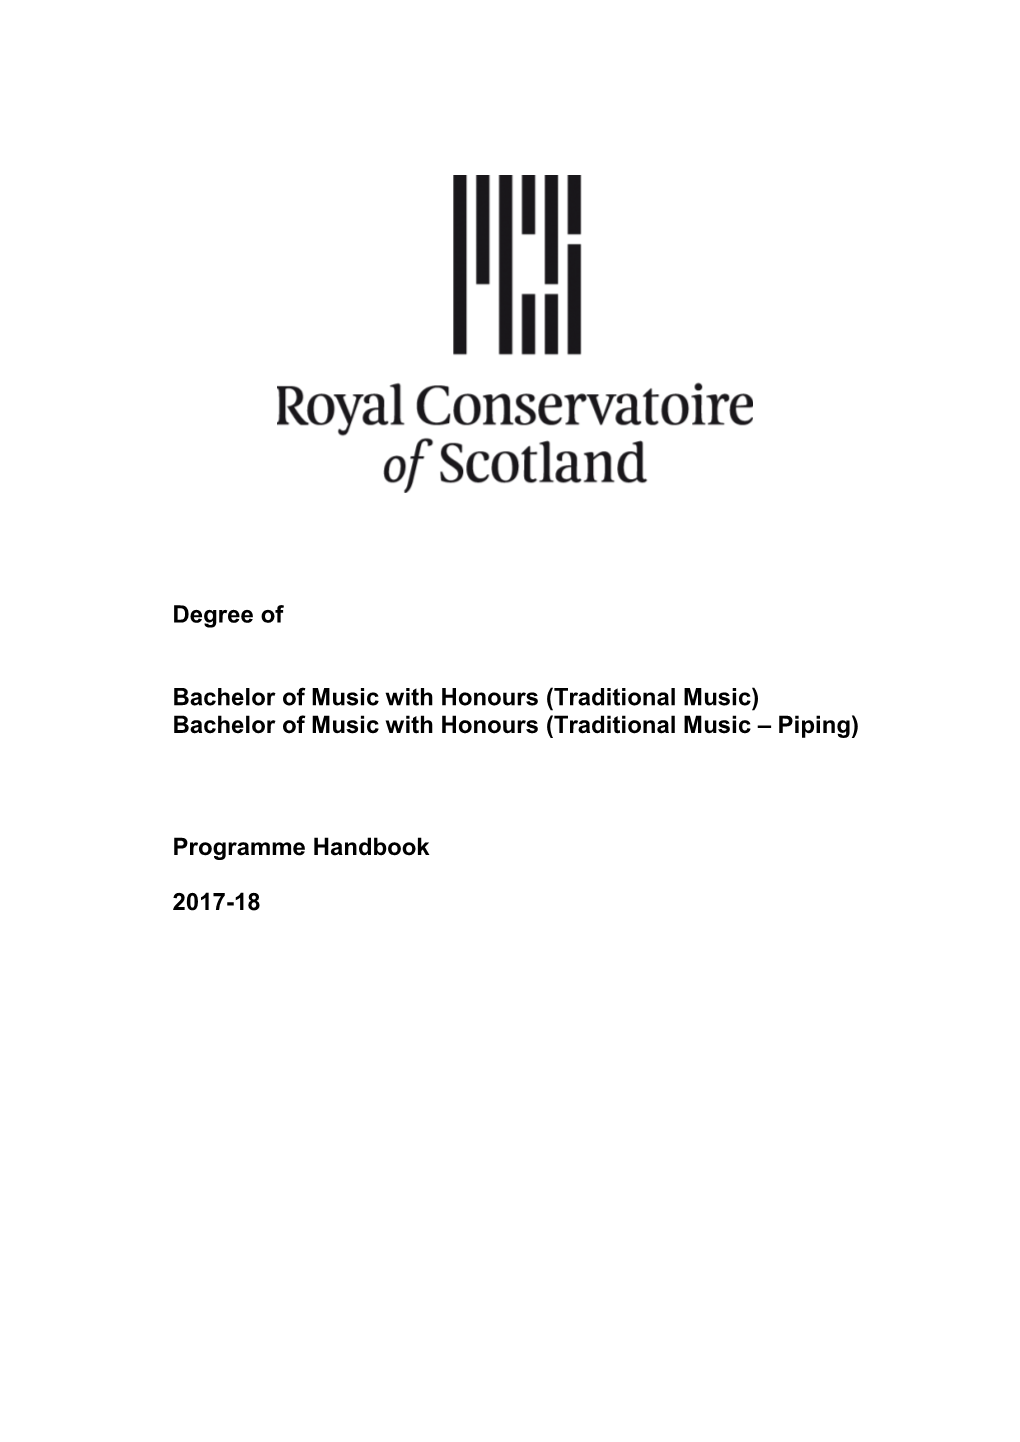 Bachelor of Music with Honours (Traditional Music – Piping)